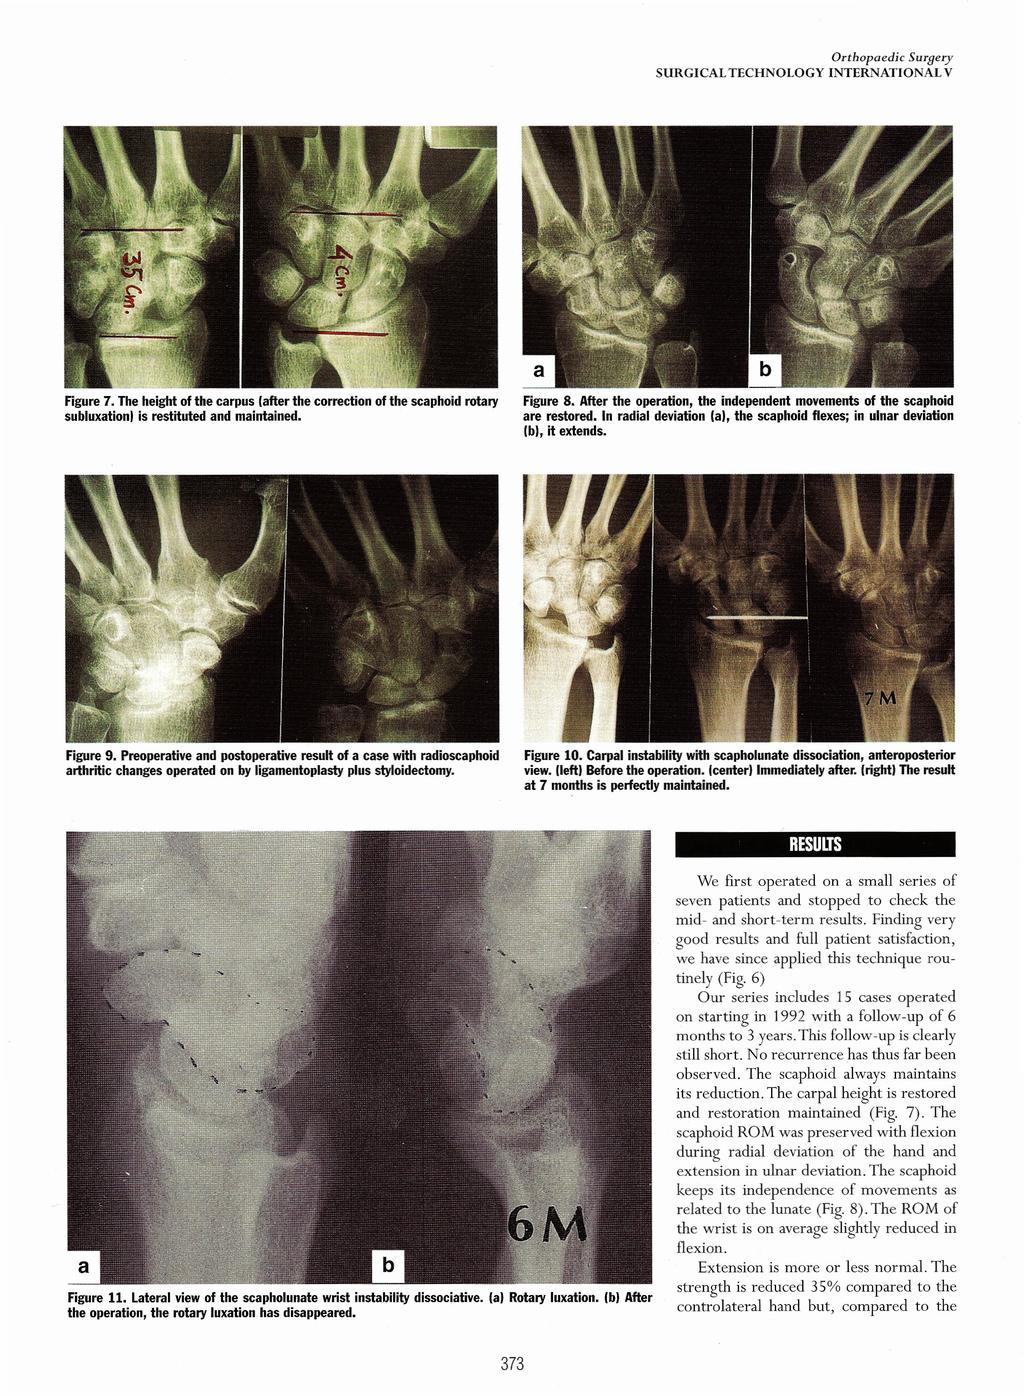 SURGICAL TECHNOLOGY Orthopaedic Surqery INTERNATIONAL V Figure 7. The height of the carpus (after the correction of the scaphoid rotary subluxation) is restituted and maintained. Figure 8.